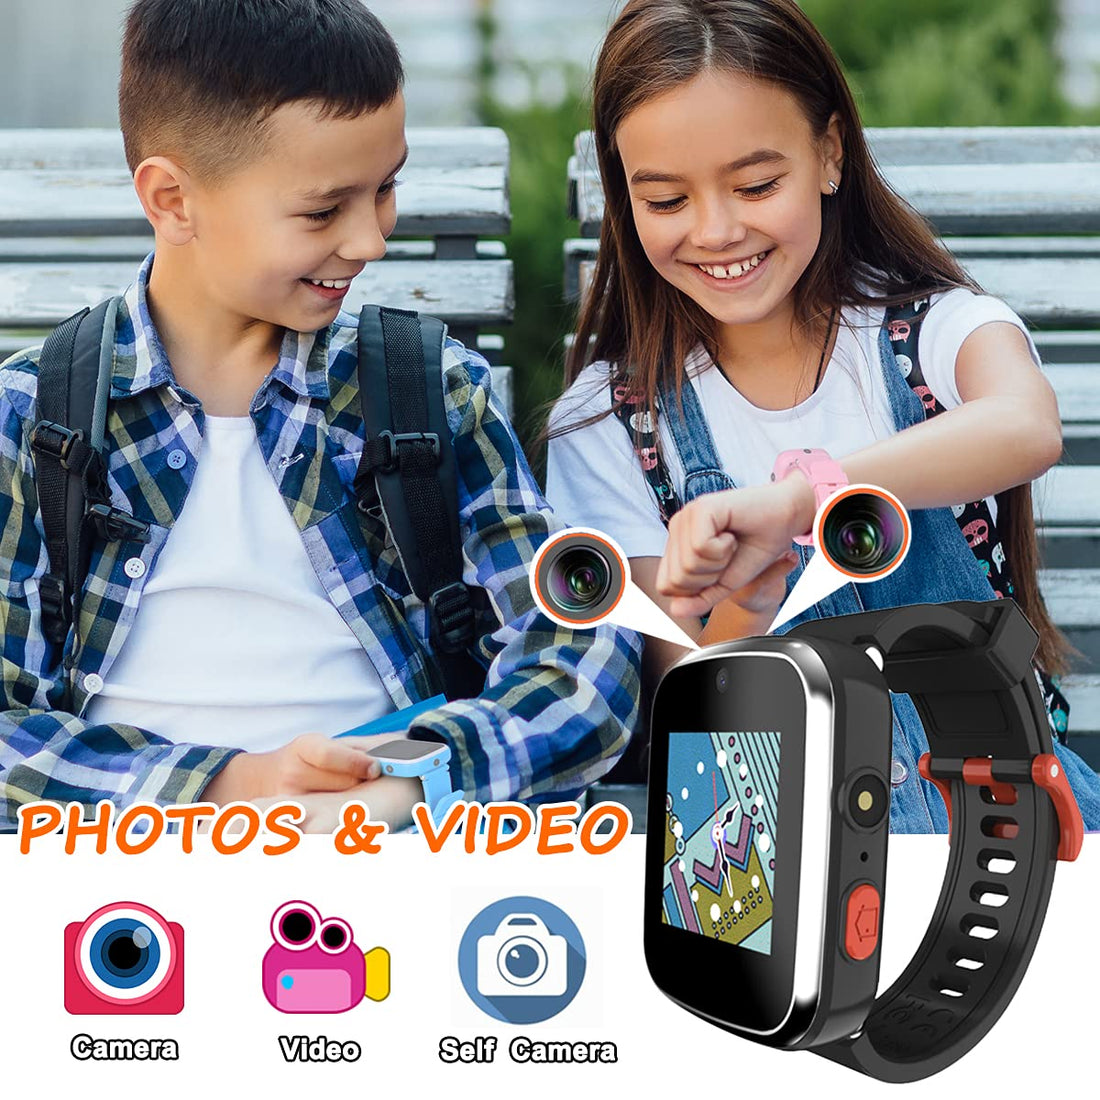 Kids Smart Watch for Boy, Toys for 3-10 Year Old Boys 1.54" HD Touchscreen Toddler Watch with Dual Camera, Games, Music Player, Pedometer Kids Watches Toys Birthday Gifts for Boys Ages 5 6 7 8